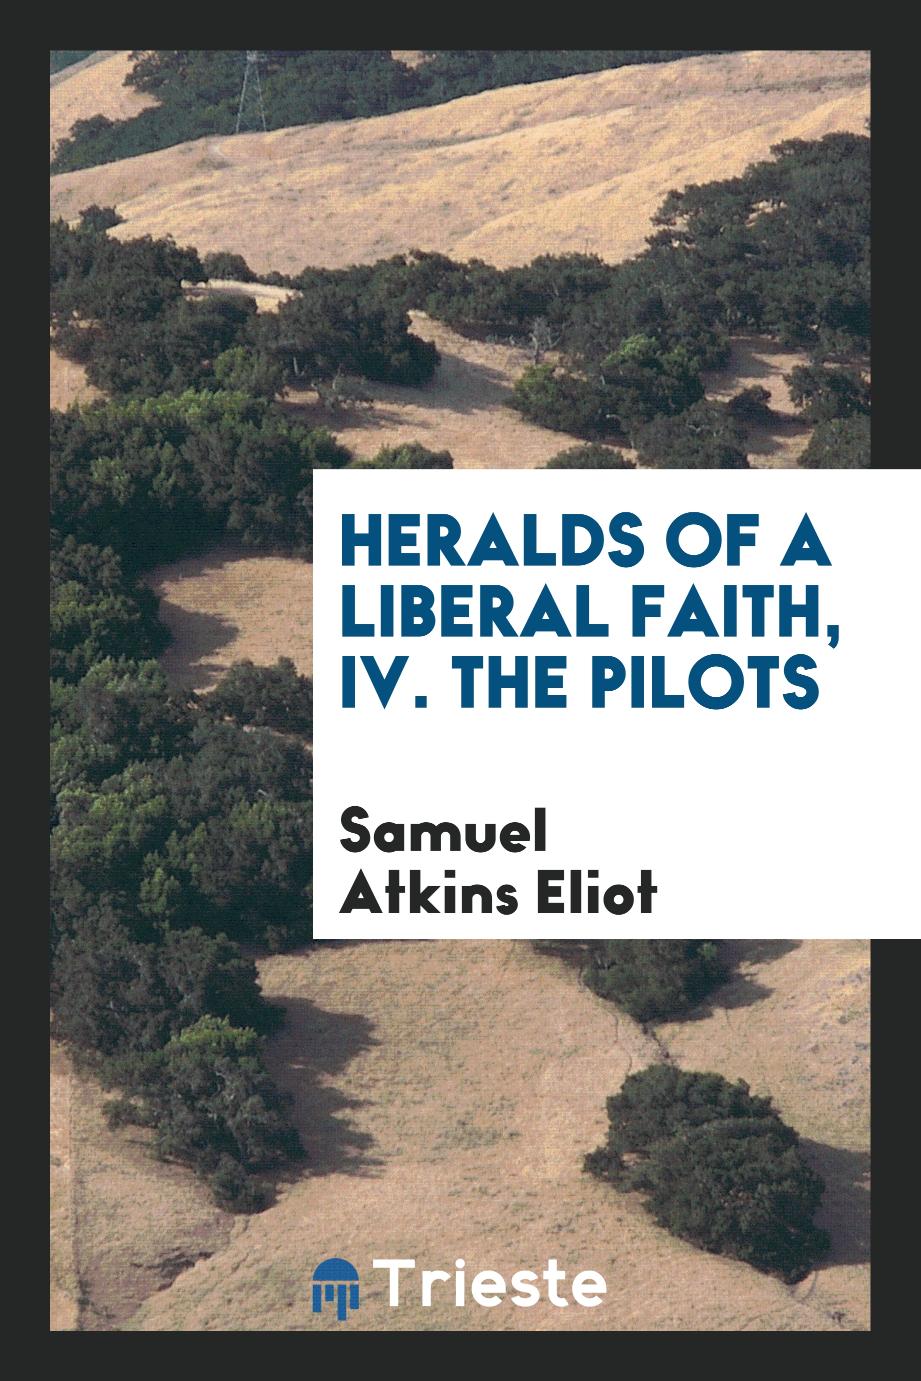 Heralds of a Liberal Faith, IV. The Pilots